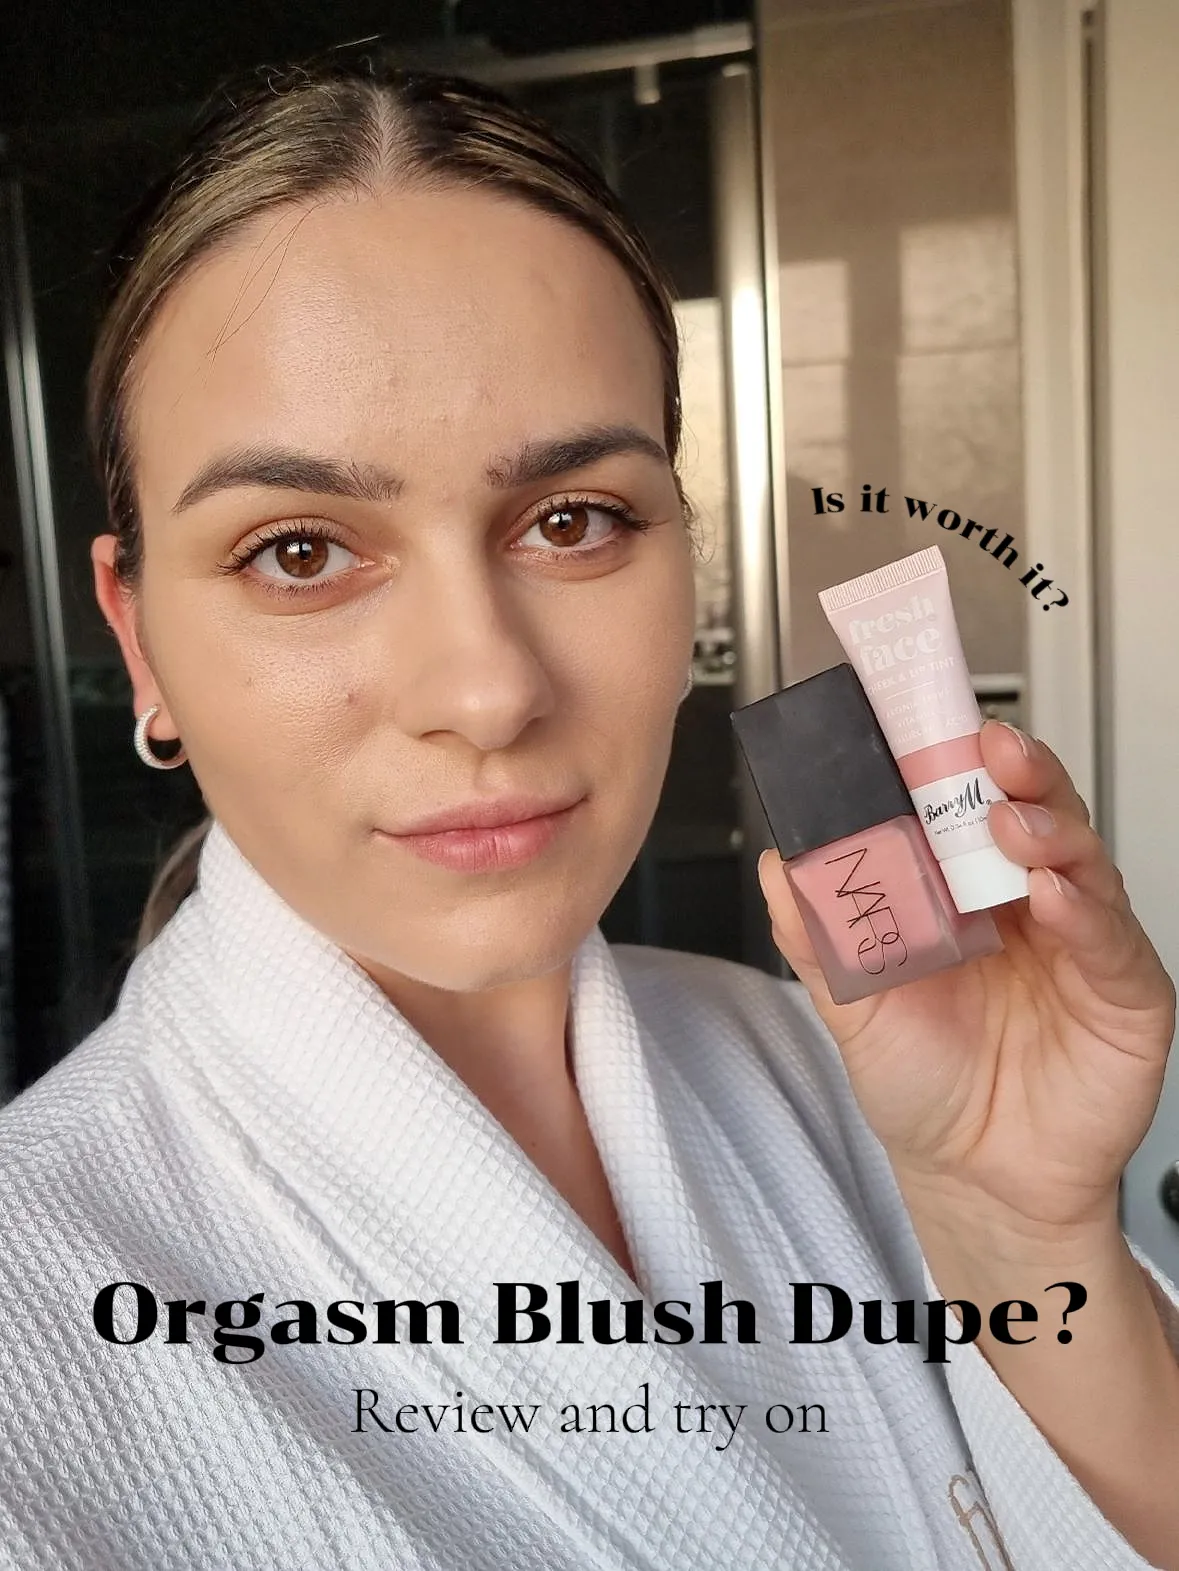 NARS Blush Drugstore Dupe - Can Milani $9.99 Really Compare?! 